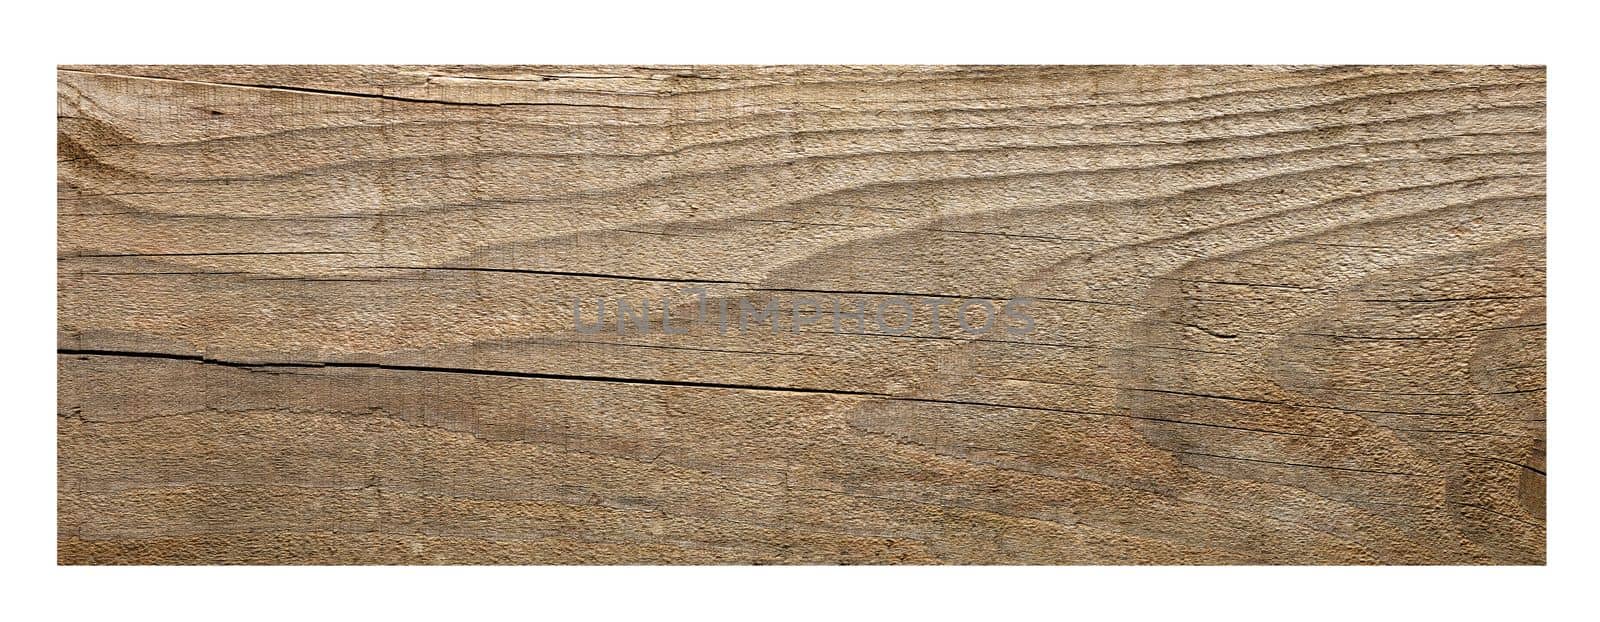 wood wooden sign background board plank signpost by Picsfive